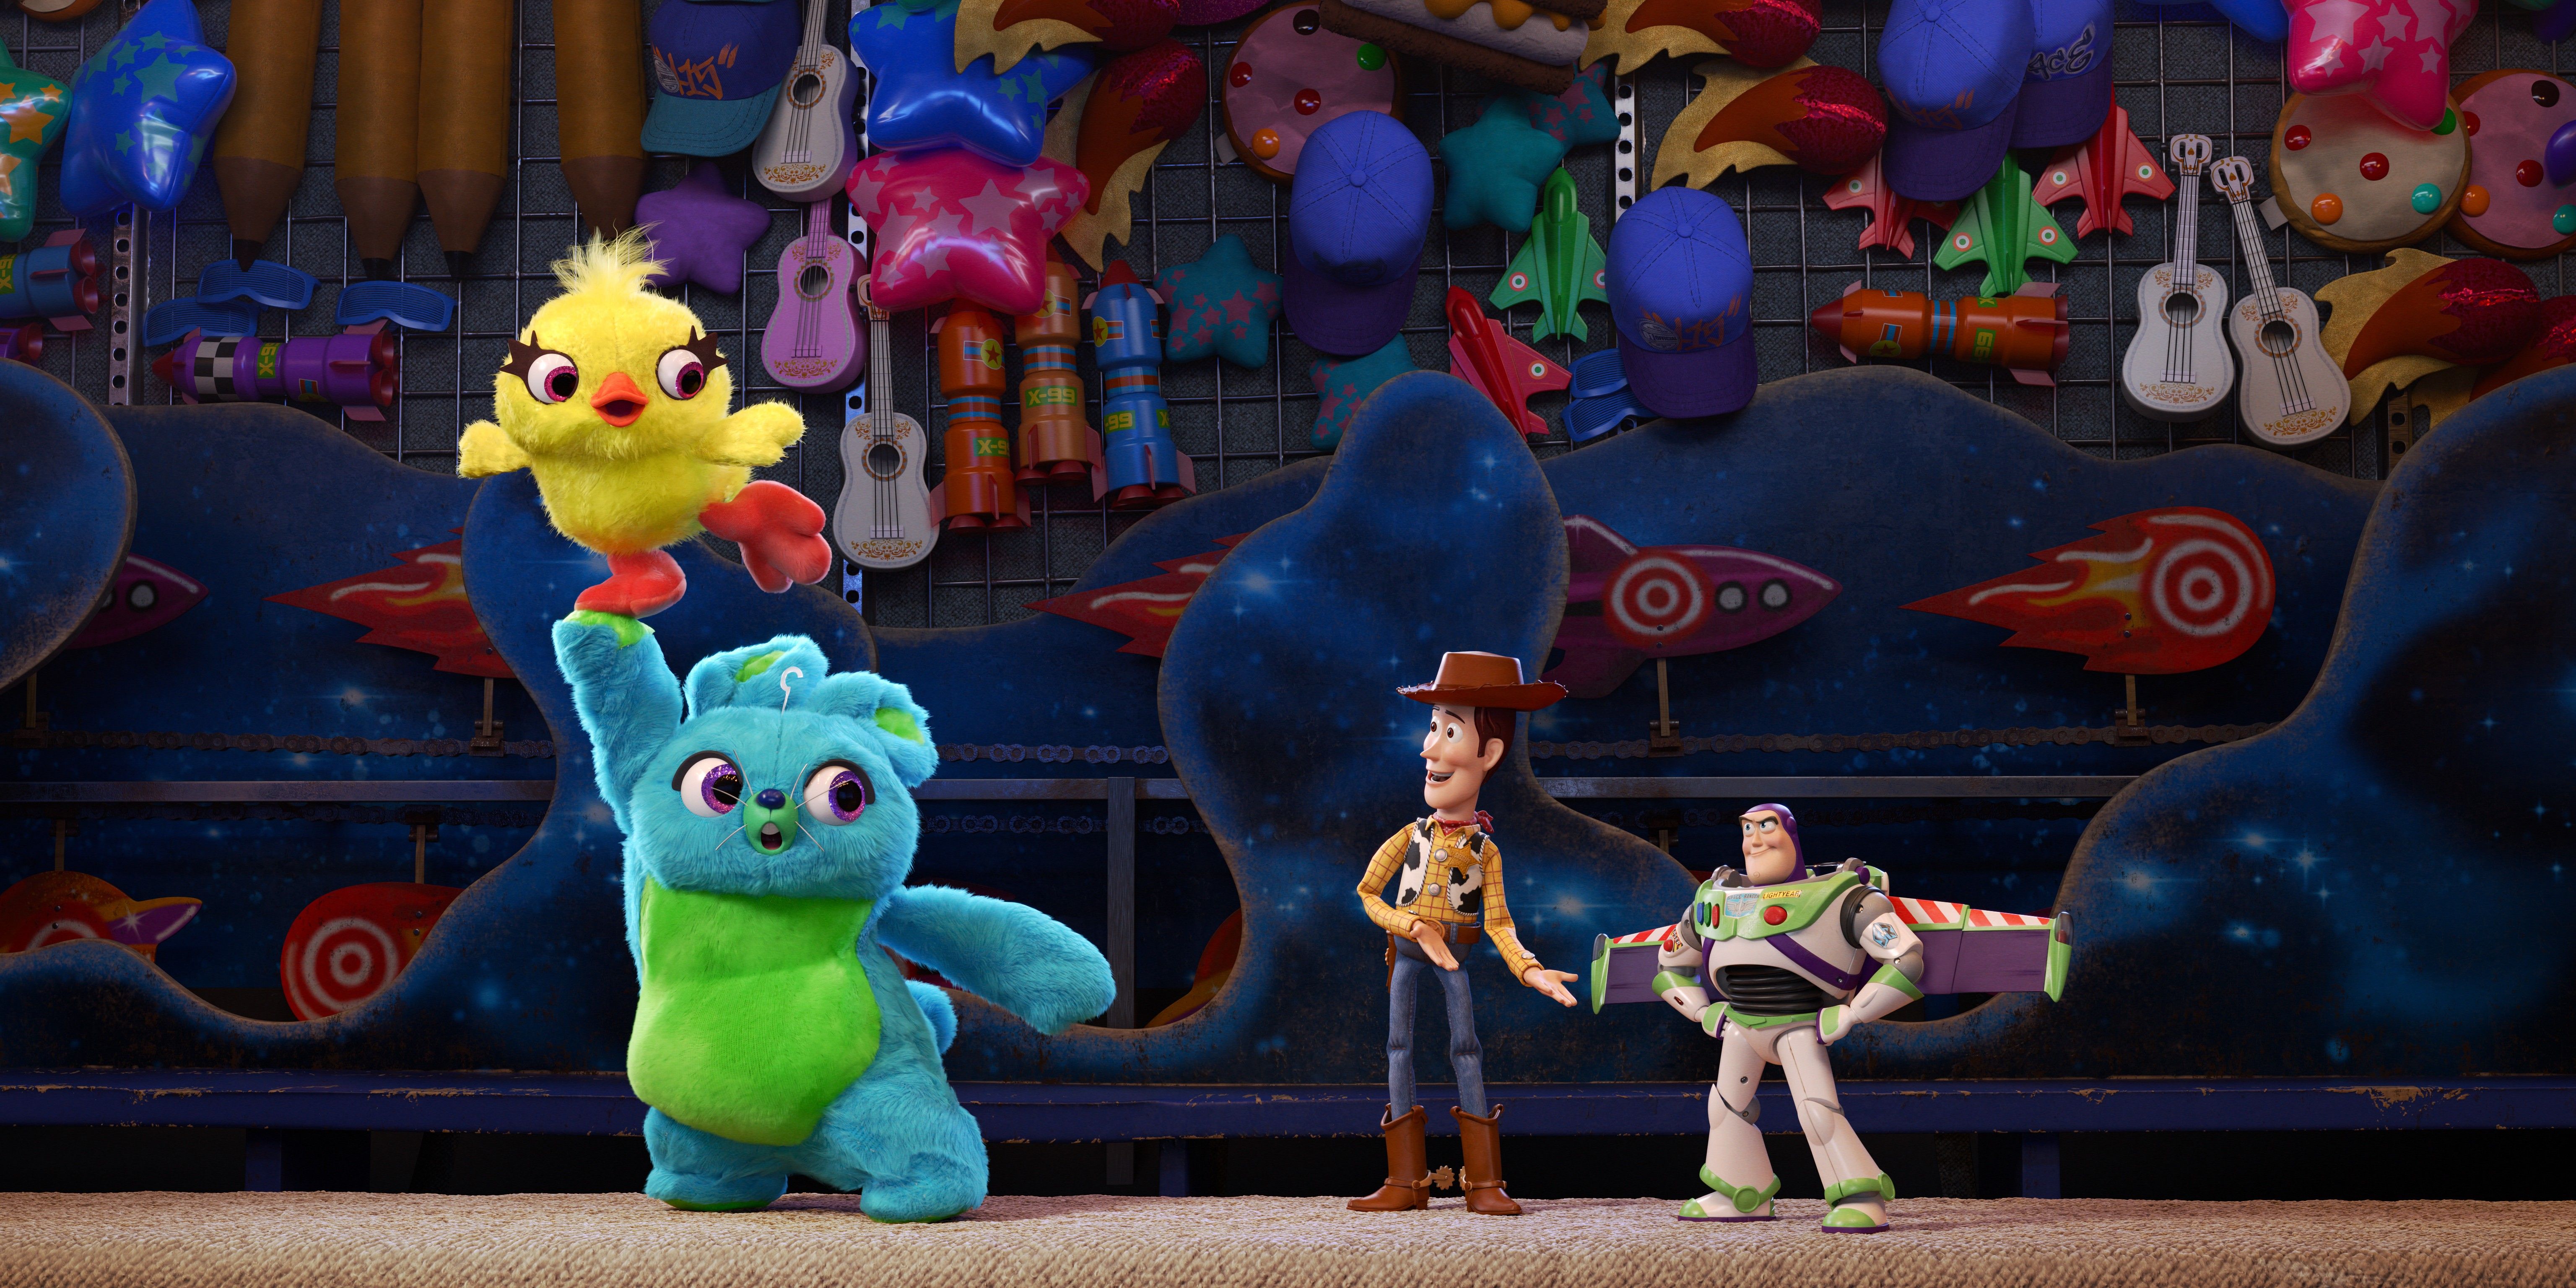 Ducky and Bunny alongside Woody and Buzz in Pixar's Toy Story 4